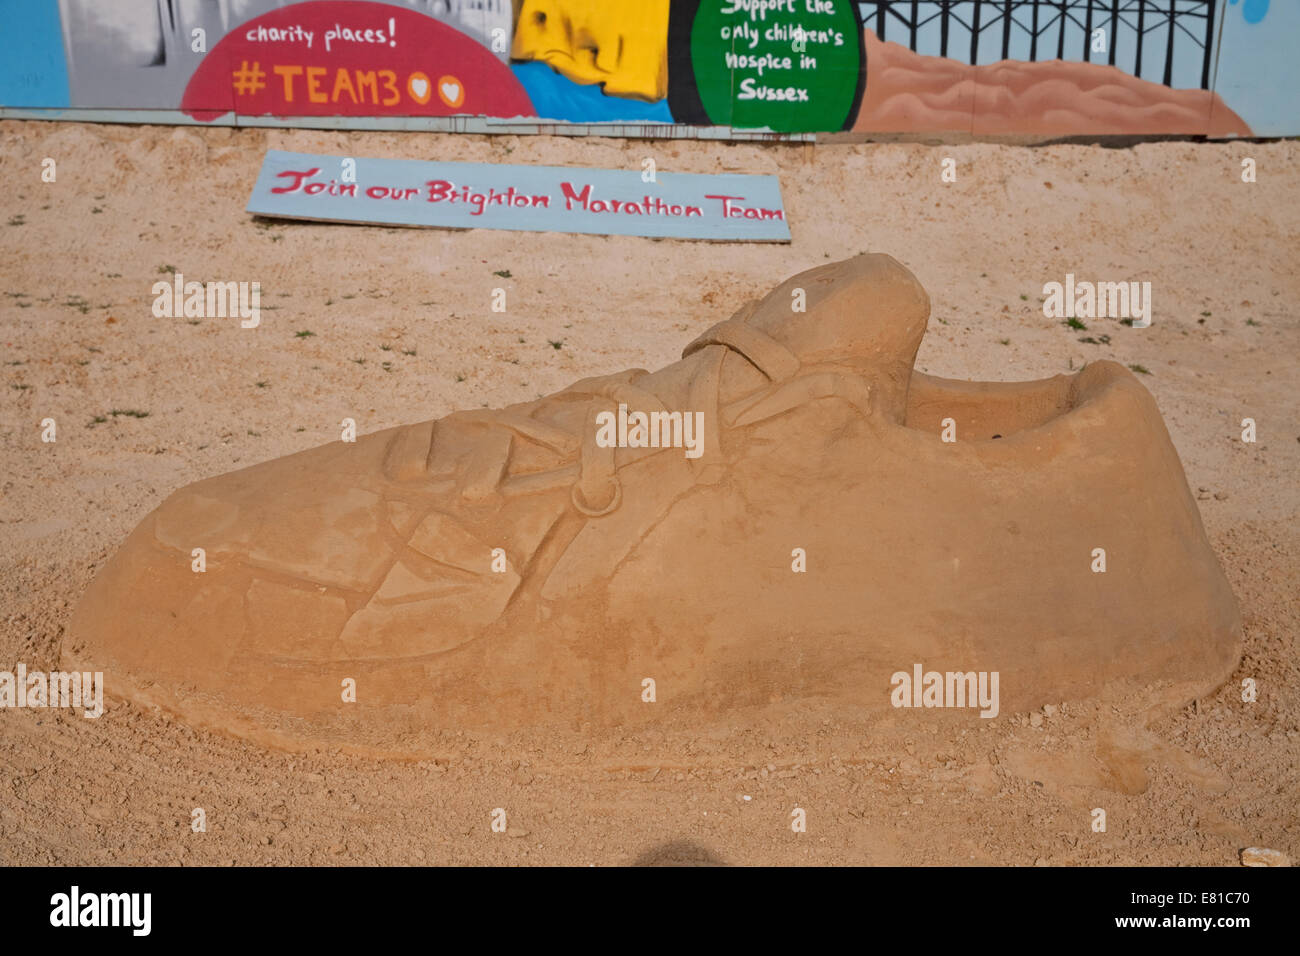 A training shoe on display at the Sand Sculpture festival in Brighton Stock Photo